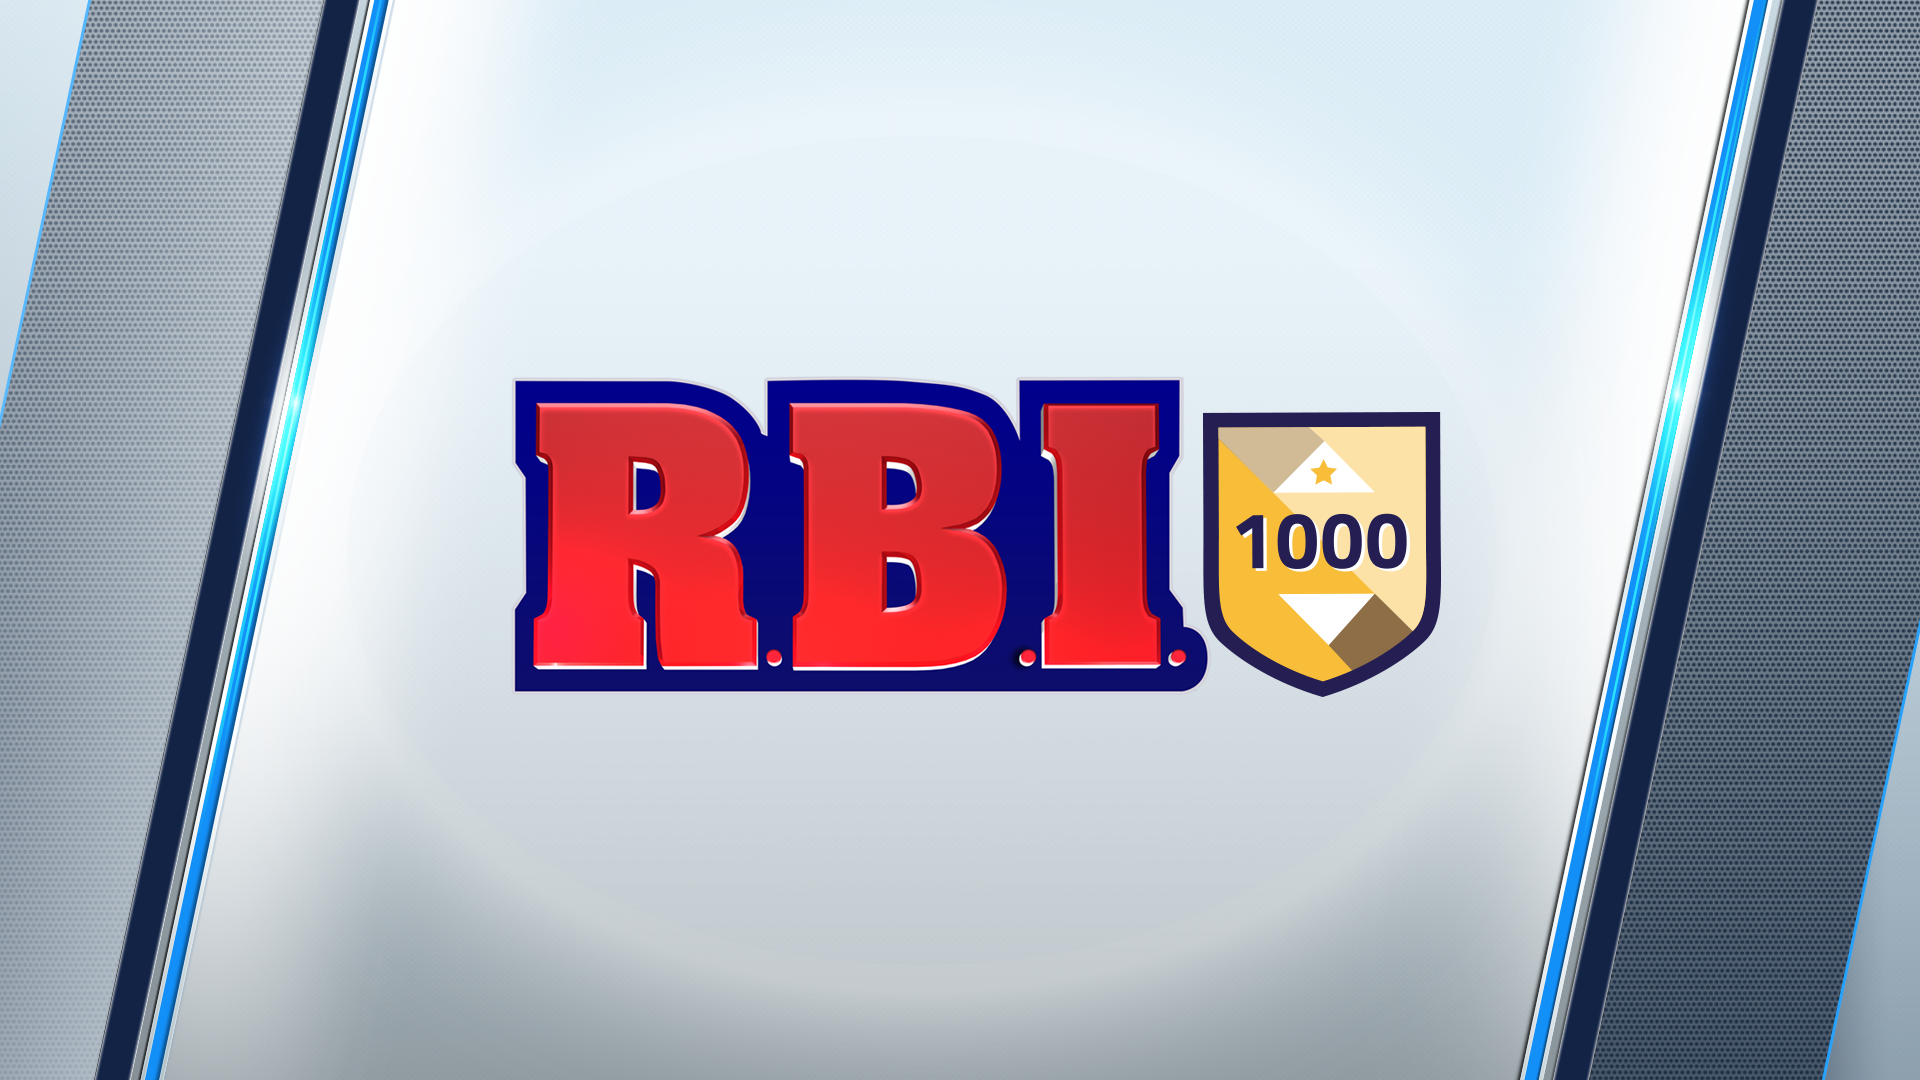 Icon for R.B.I. Master